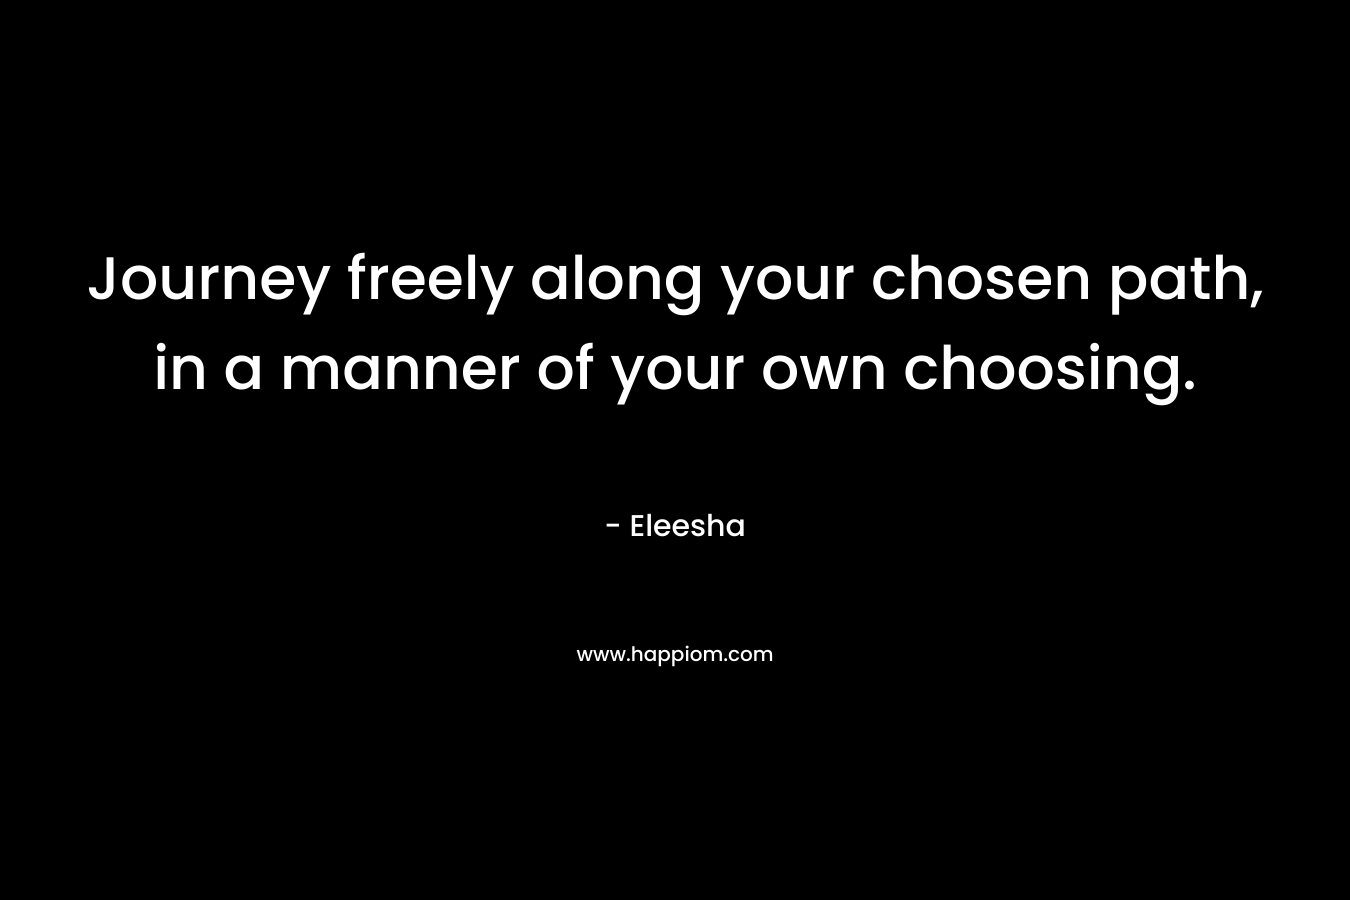 Journey freely along your chosen path, in a manner of your own choosing. – Eleesha